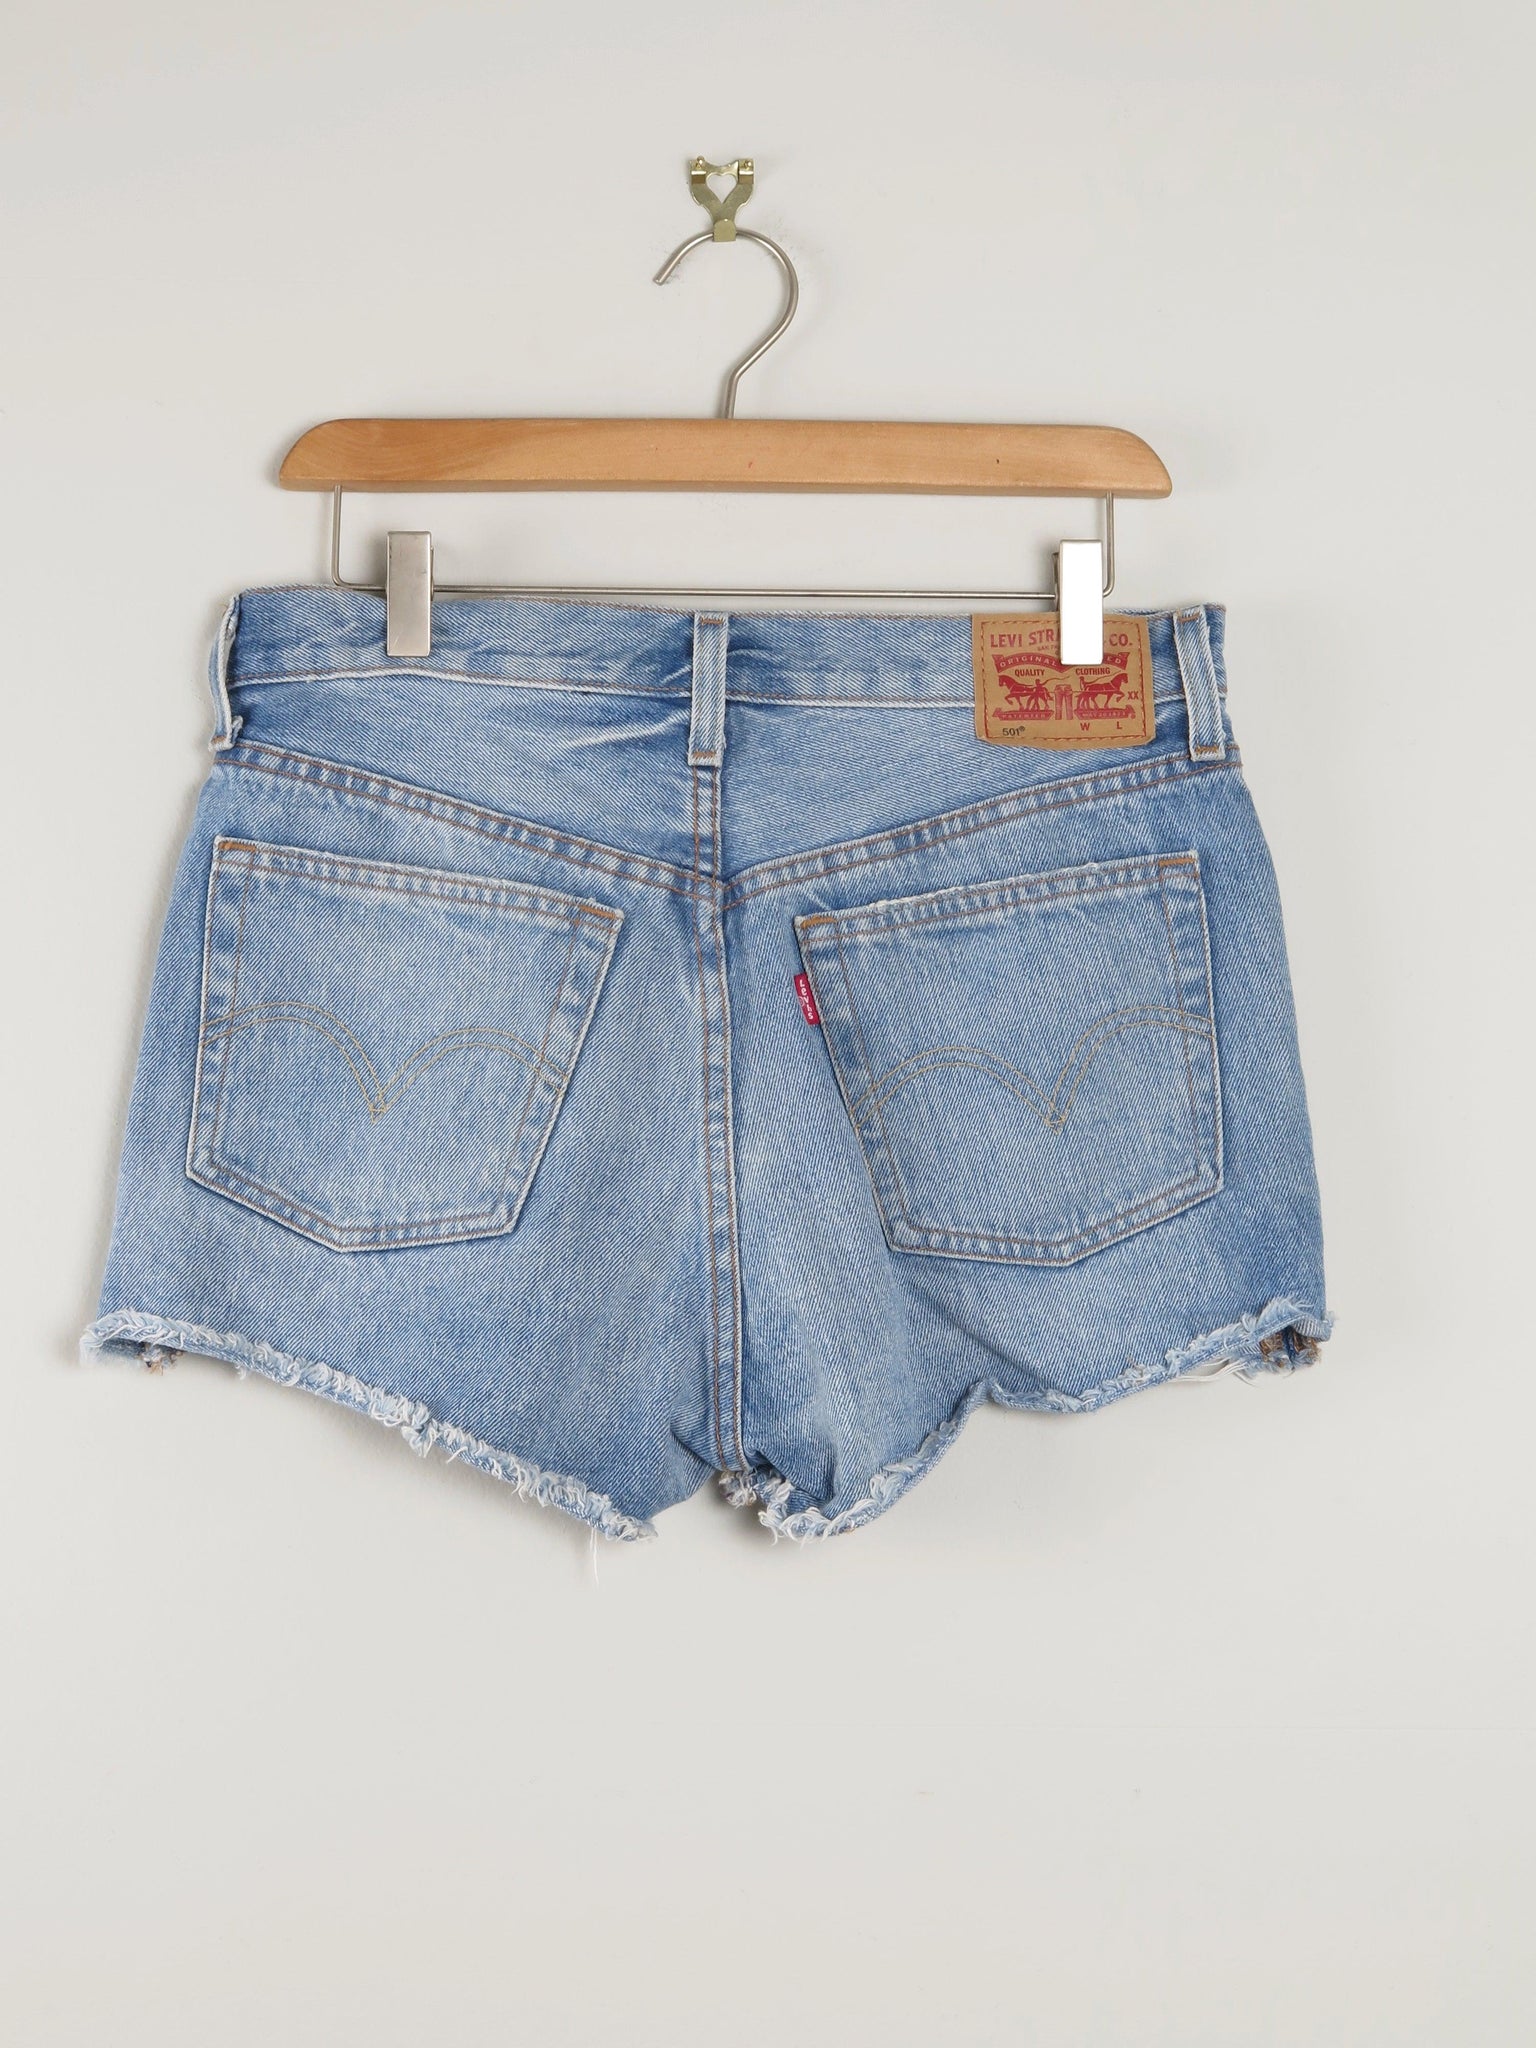 Levis Shorts 30W 10 - The Harlequin